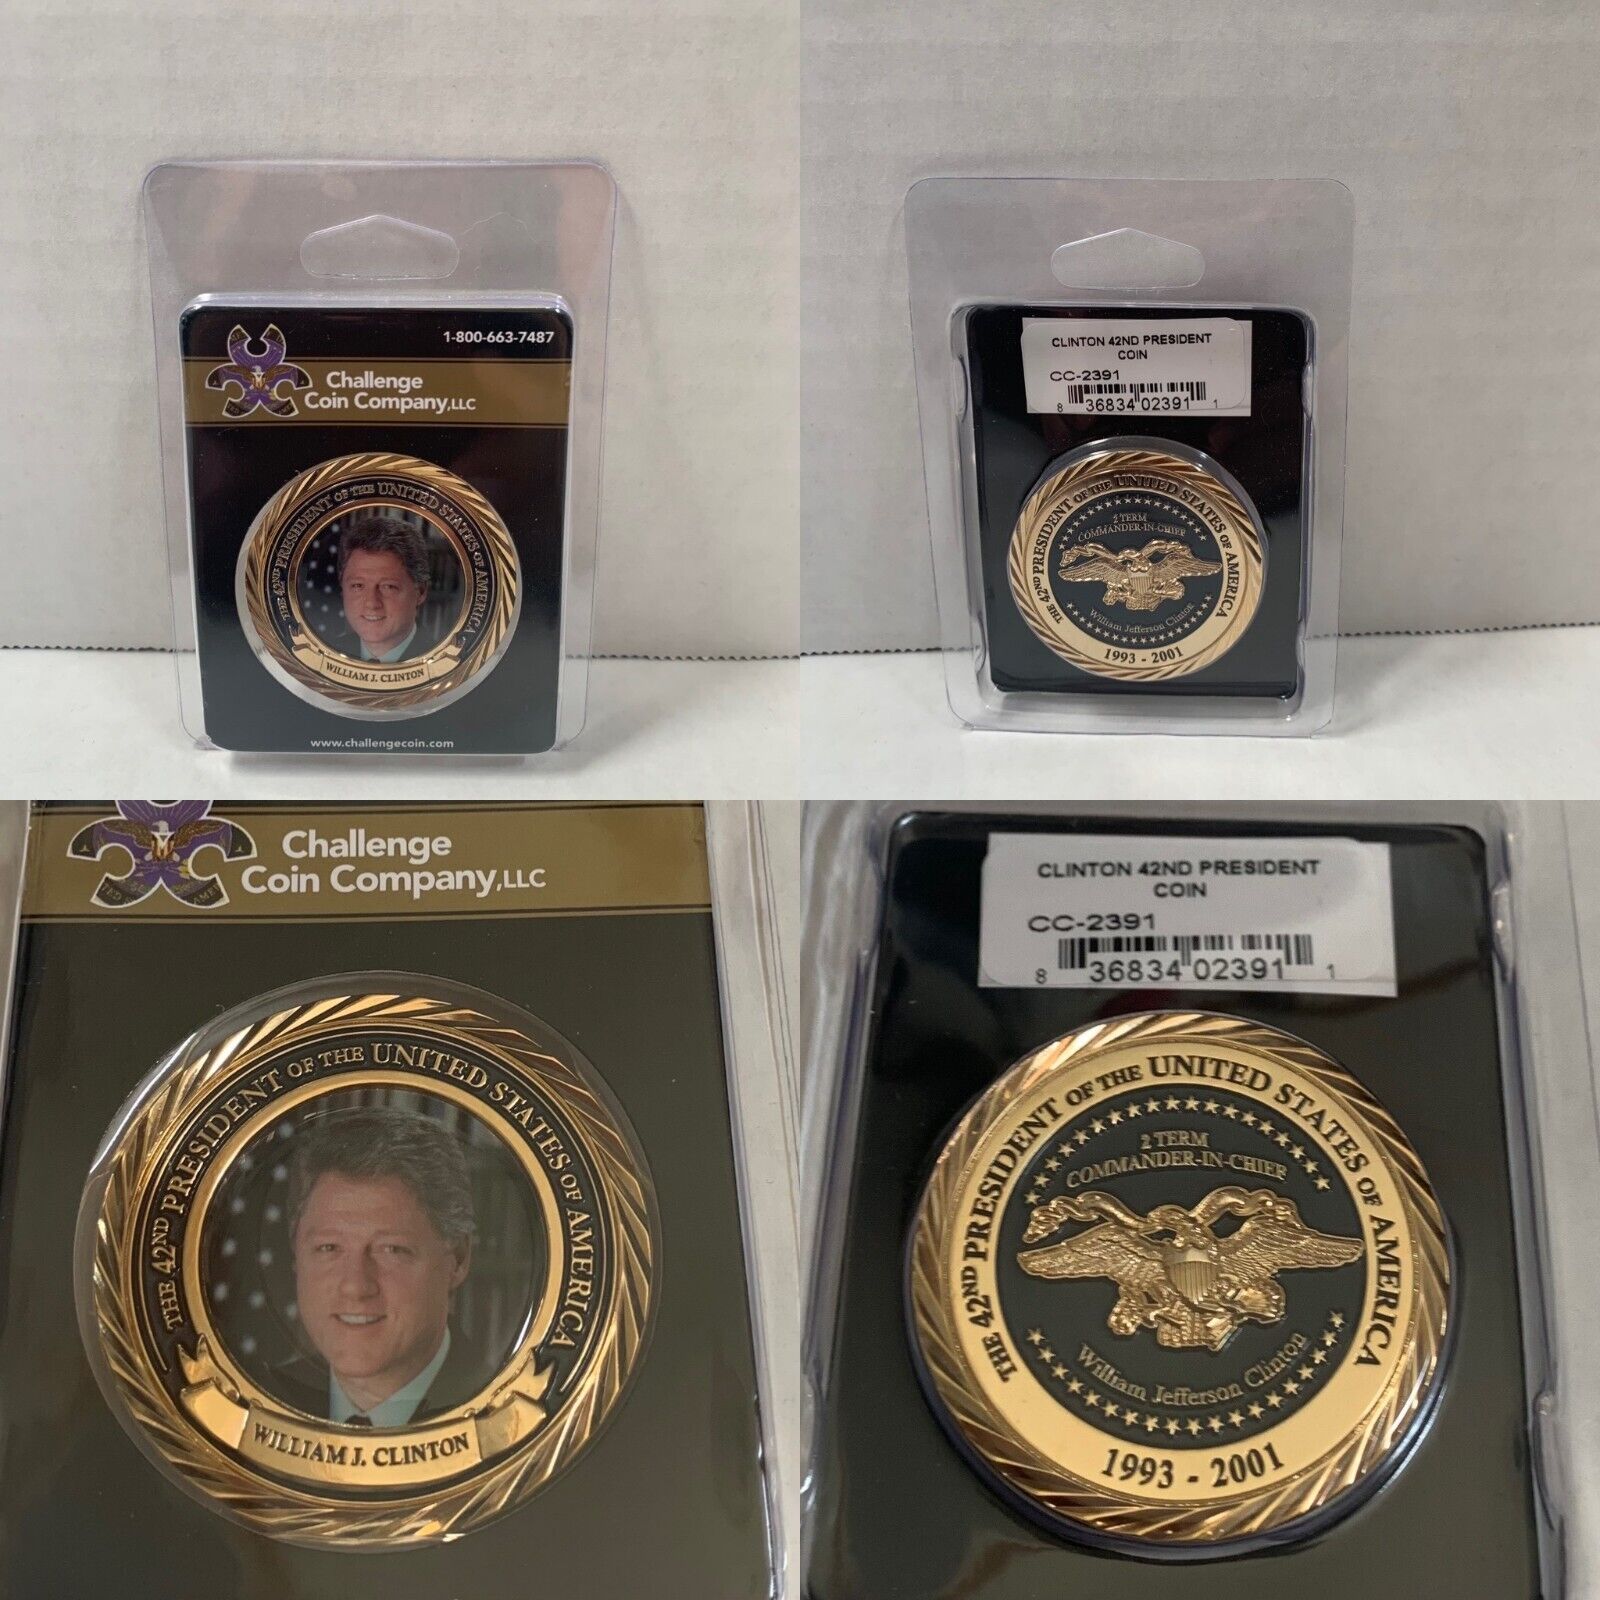 William J Clinton 42nd President Of The United States President Coin Brand New